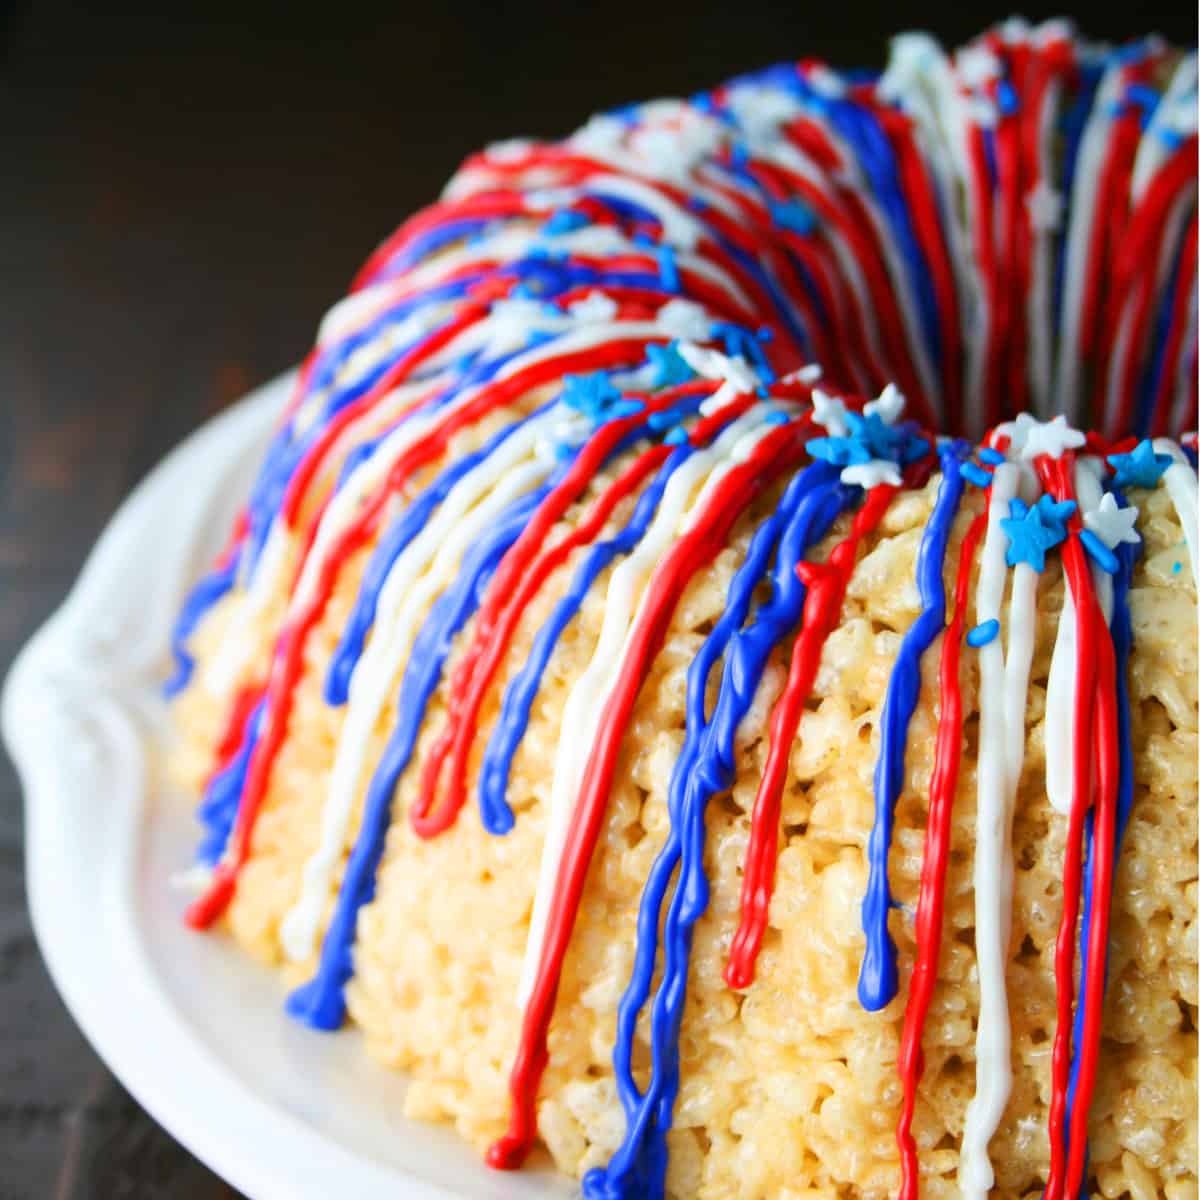 Rice krispy treats in the shape of a Bundt cake with chocolate drizzles.